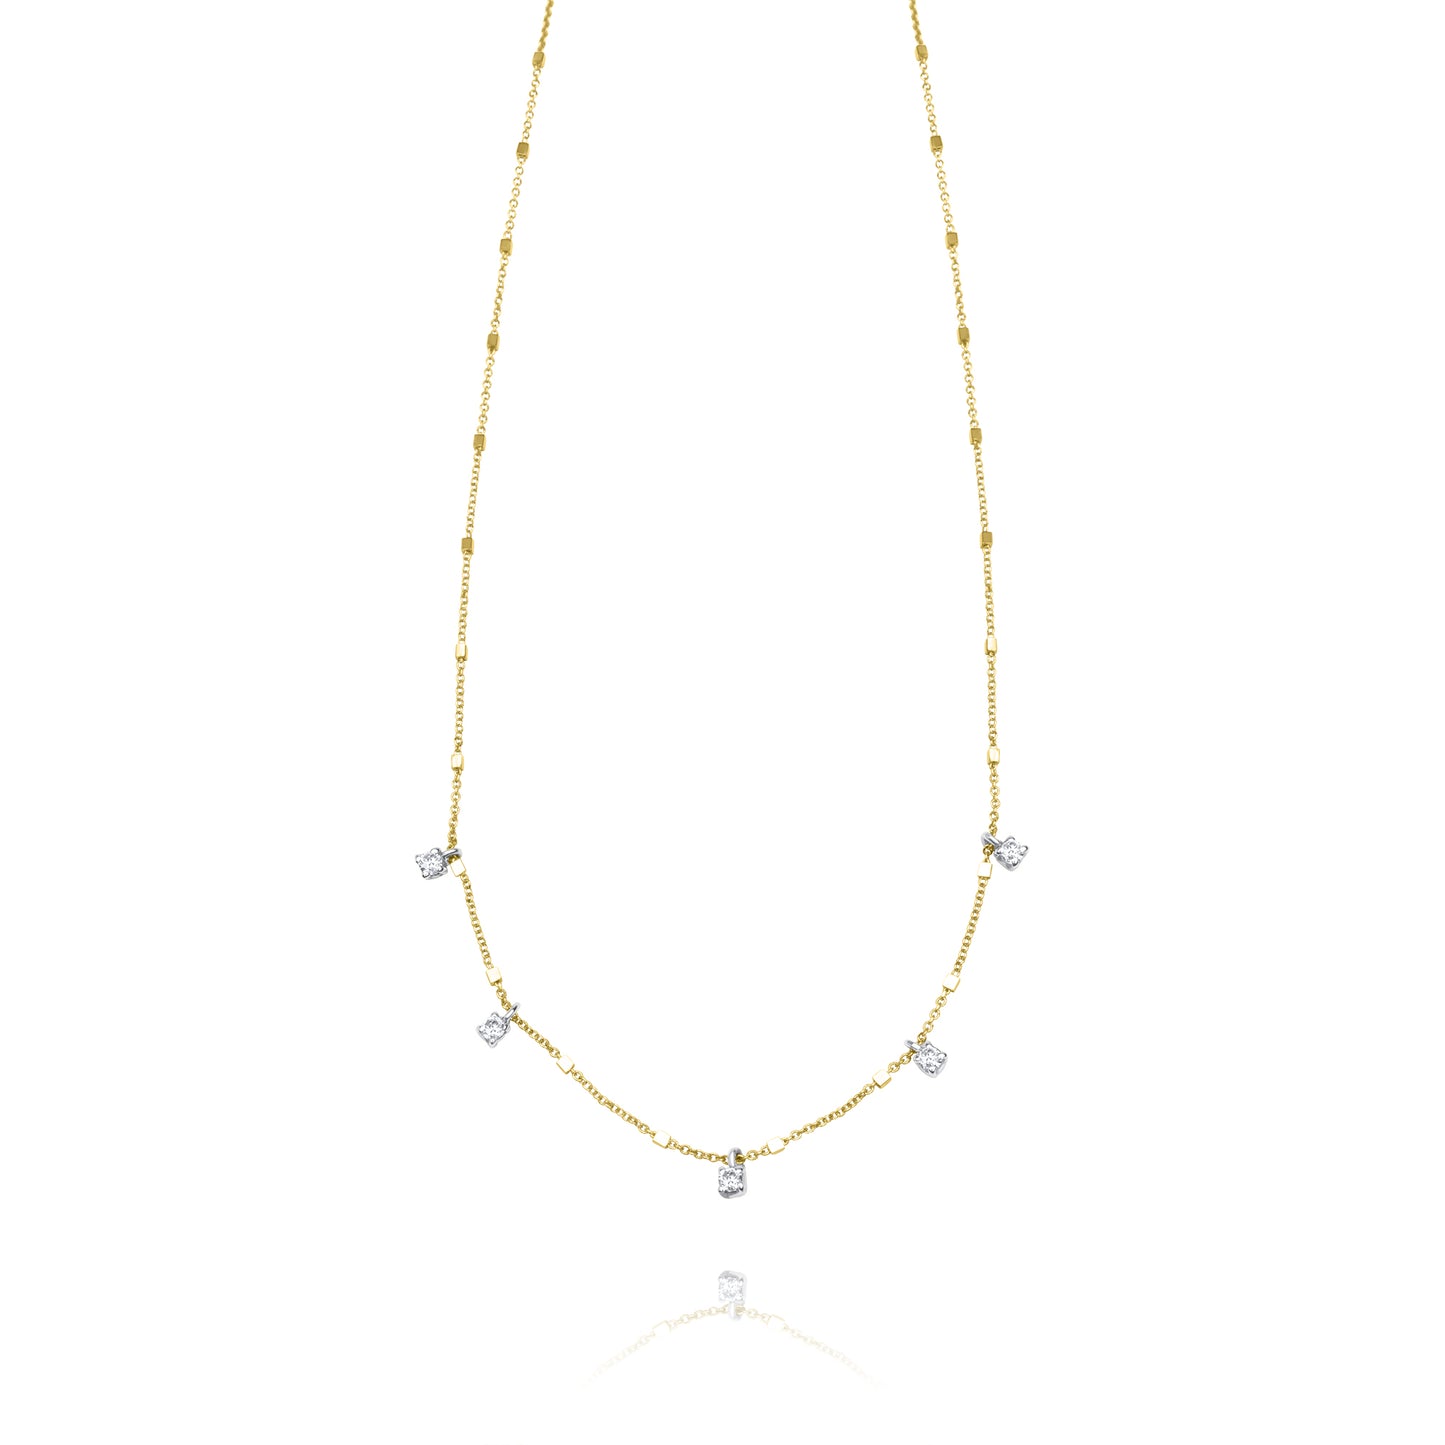 5 White Gold Prong Set in 14k Yellow Gold Chain Necklace